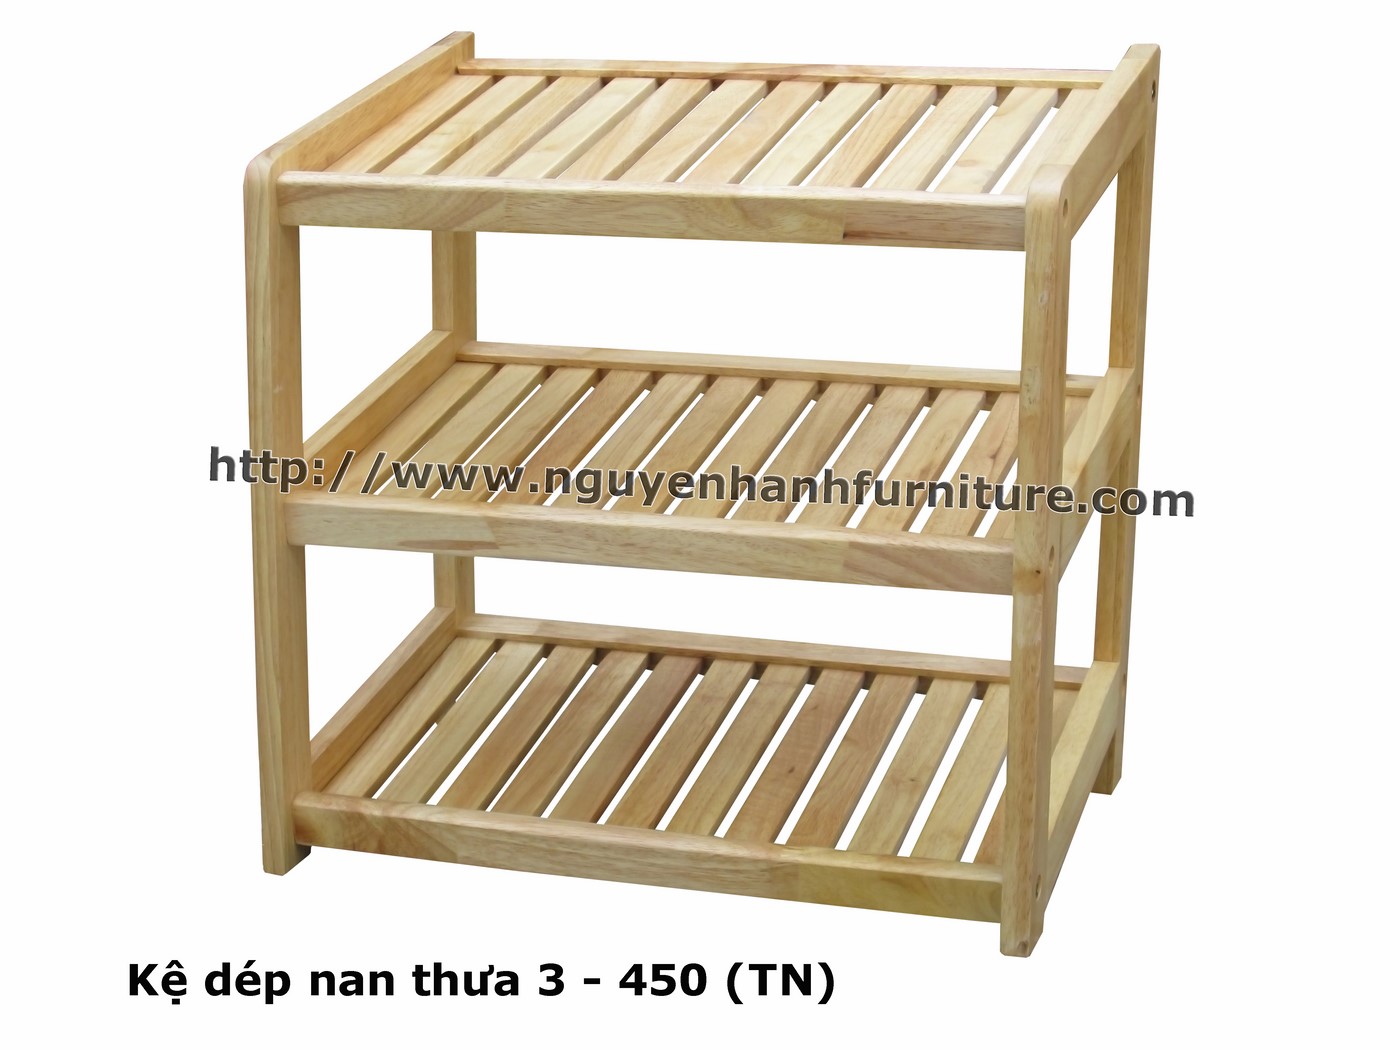 Name product: Shoeshelf 3 Floors 450 with sparse blades (Natural) - Dimensions: 45 x 30 x 45 (H) - Description: Wood natural rubber